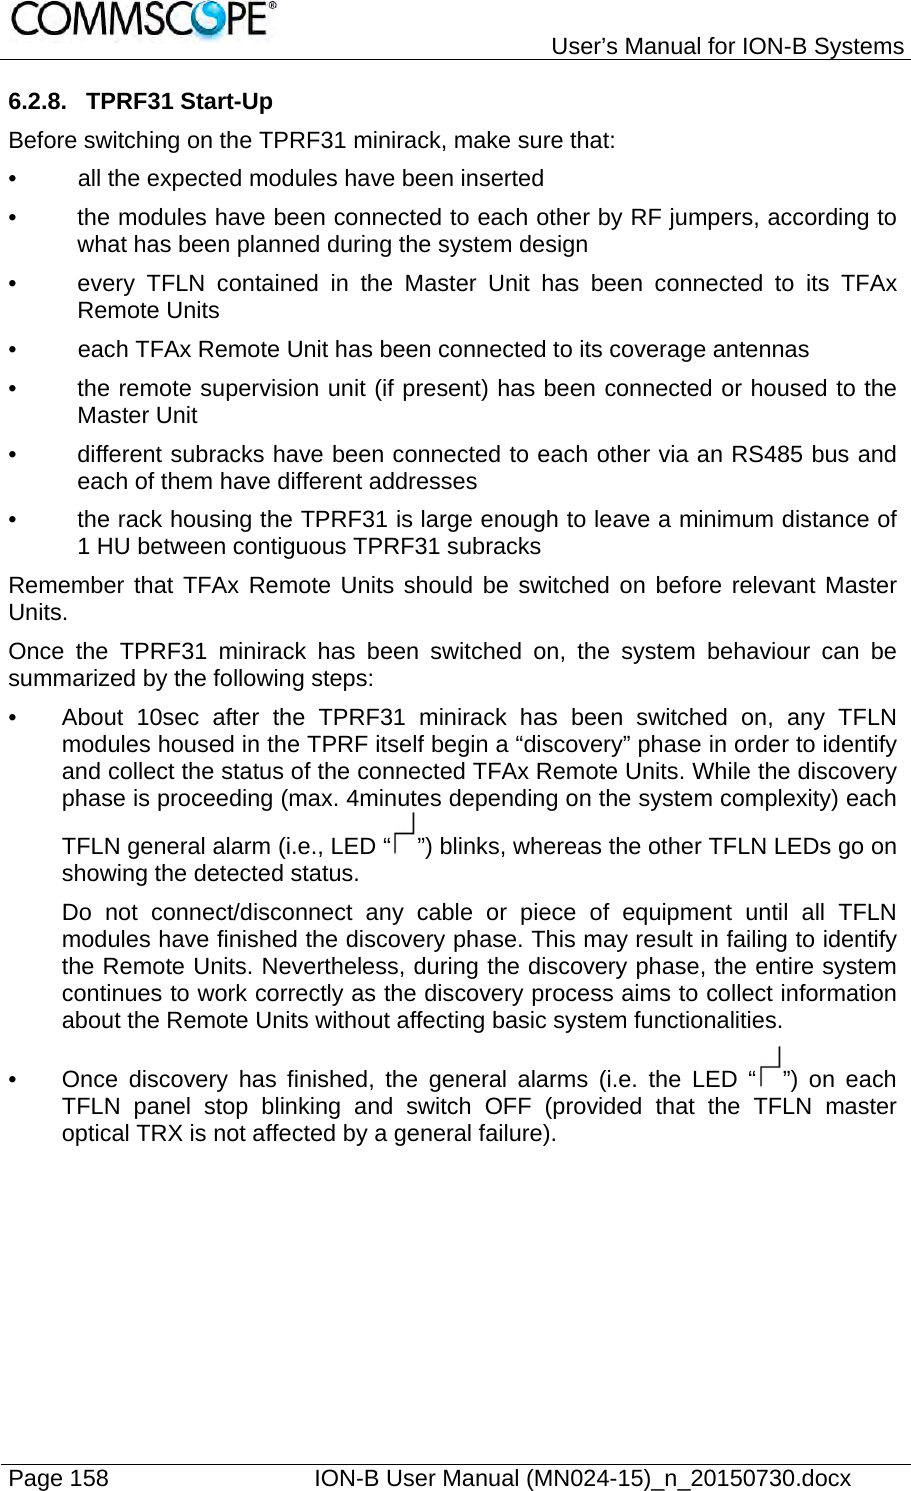   User’s Manual for ION-B Systems Page 158    ION-B User Manual (MN024-15)_n_20150730.docx  6.2.8. TPRF31 Start-Up Before switching on the TPRF31 minirack, make sure that: •  all the expected modules have been inserted  •  the modules have been connected to each other by RF jumpers, according to what has been planned during the system design •  every TFLN contained in the Master Unit has been connected to its TFAx Remote Units •  each TFAx Remote Unit has been connected to its coverage antennas •  the remote supervision unit (if present) has been connected or housed to the Master Unit •  different subracks have been connected to each other via an RS485 bus and each of them have different addresses •  the rack housing the TPRF31 is large enough to leave a minimum distance of 1 HU between contiguous TPRF31 subracks  Remember that TFAx Remote Units should be switched on before relevant Master Units. Once the TPRF31 minirack has been switched on, the system behaviour can be summarized by the following steps: •  About 10sec after the TPRF31 minirack has been switched on, any TFLN modules housed in the TPRF itself begin a “discovery” phase in order to identify and collect the status of the connected TFAx Remote Units. While the discovery phase is proceeding (max. 4minutes depending on the system complexity) each TFLN general alarm (i.e., LED “ ”) blinks, whereas the other TFLN LEDs go on showing the detected status. Do not connect/disconnect any cable or piece of equipment until all TFLN modules have finished the discovery phase. This may result in failing to identify the Remote Units. Nevertheless, during the discovery phase, the entire system continues to work correctly as the discovery process aims to collect information about the Remote Units without affecting basic system functionalities. •  Once discovery has finished, the general alarms (i.e. the LED “ ”) on each TFLN panel stop blinking and switch OFF (provided that the TFLN master optical TRX is not affected by a general failure). 